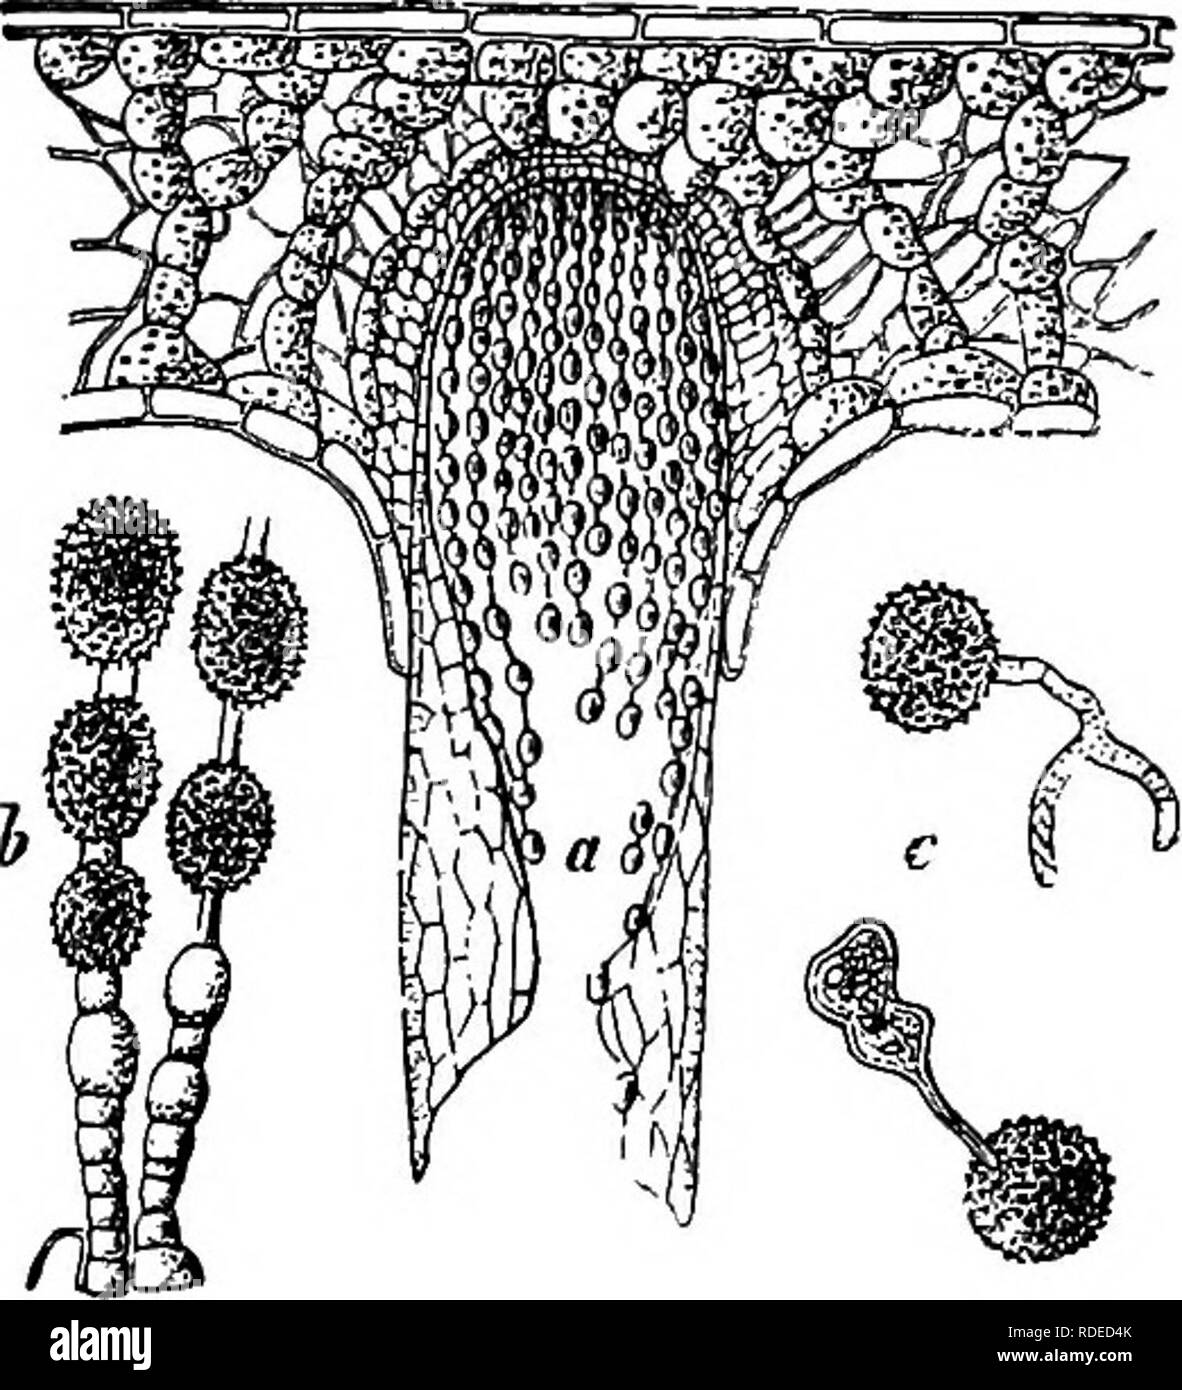 . Diseases of plants induced by cryptogamic parasites : introduction to the study of pathogenic Fungi, slime-Fungi, bacteria, &amp; Algae . Plant diseases; Parasitic plants; Fungi. Fig. 205.—Calypiospora Goeppertiana. Aecidia on the under surface of needles of Silver Fir. (v. Tubeuf del.). Fig. 206.—Aeoidium in a needle of Silver Fir (much enlarged). 6, Series of aecidiospores and intermediate cell^. c, Germinating aecidiospores. (After B. Hartig.) This aecidium is also found on Aiies cephalonica in Upper Bavaria. Barclayella deformans Diet.^ This has been found in the Himalaya region on needl Stock Photo